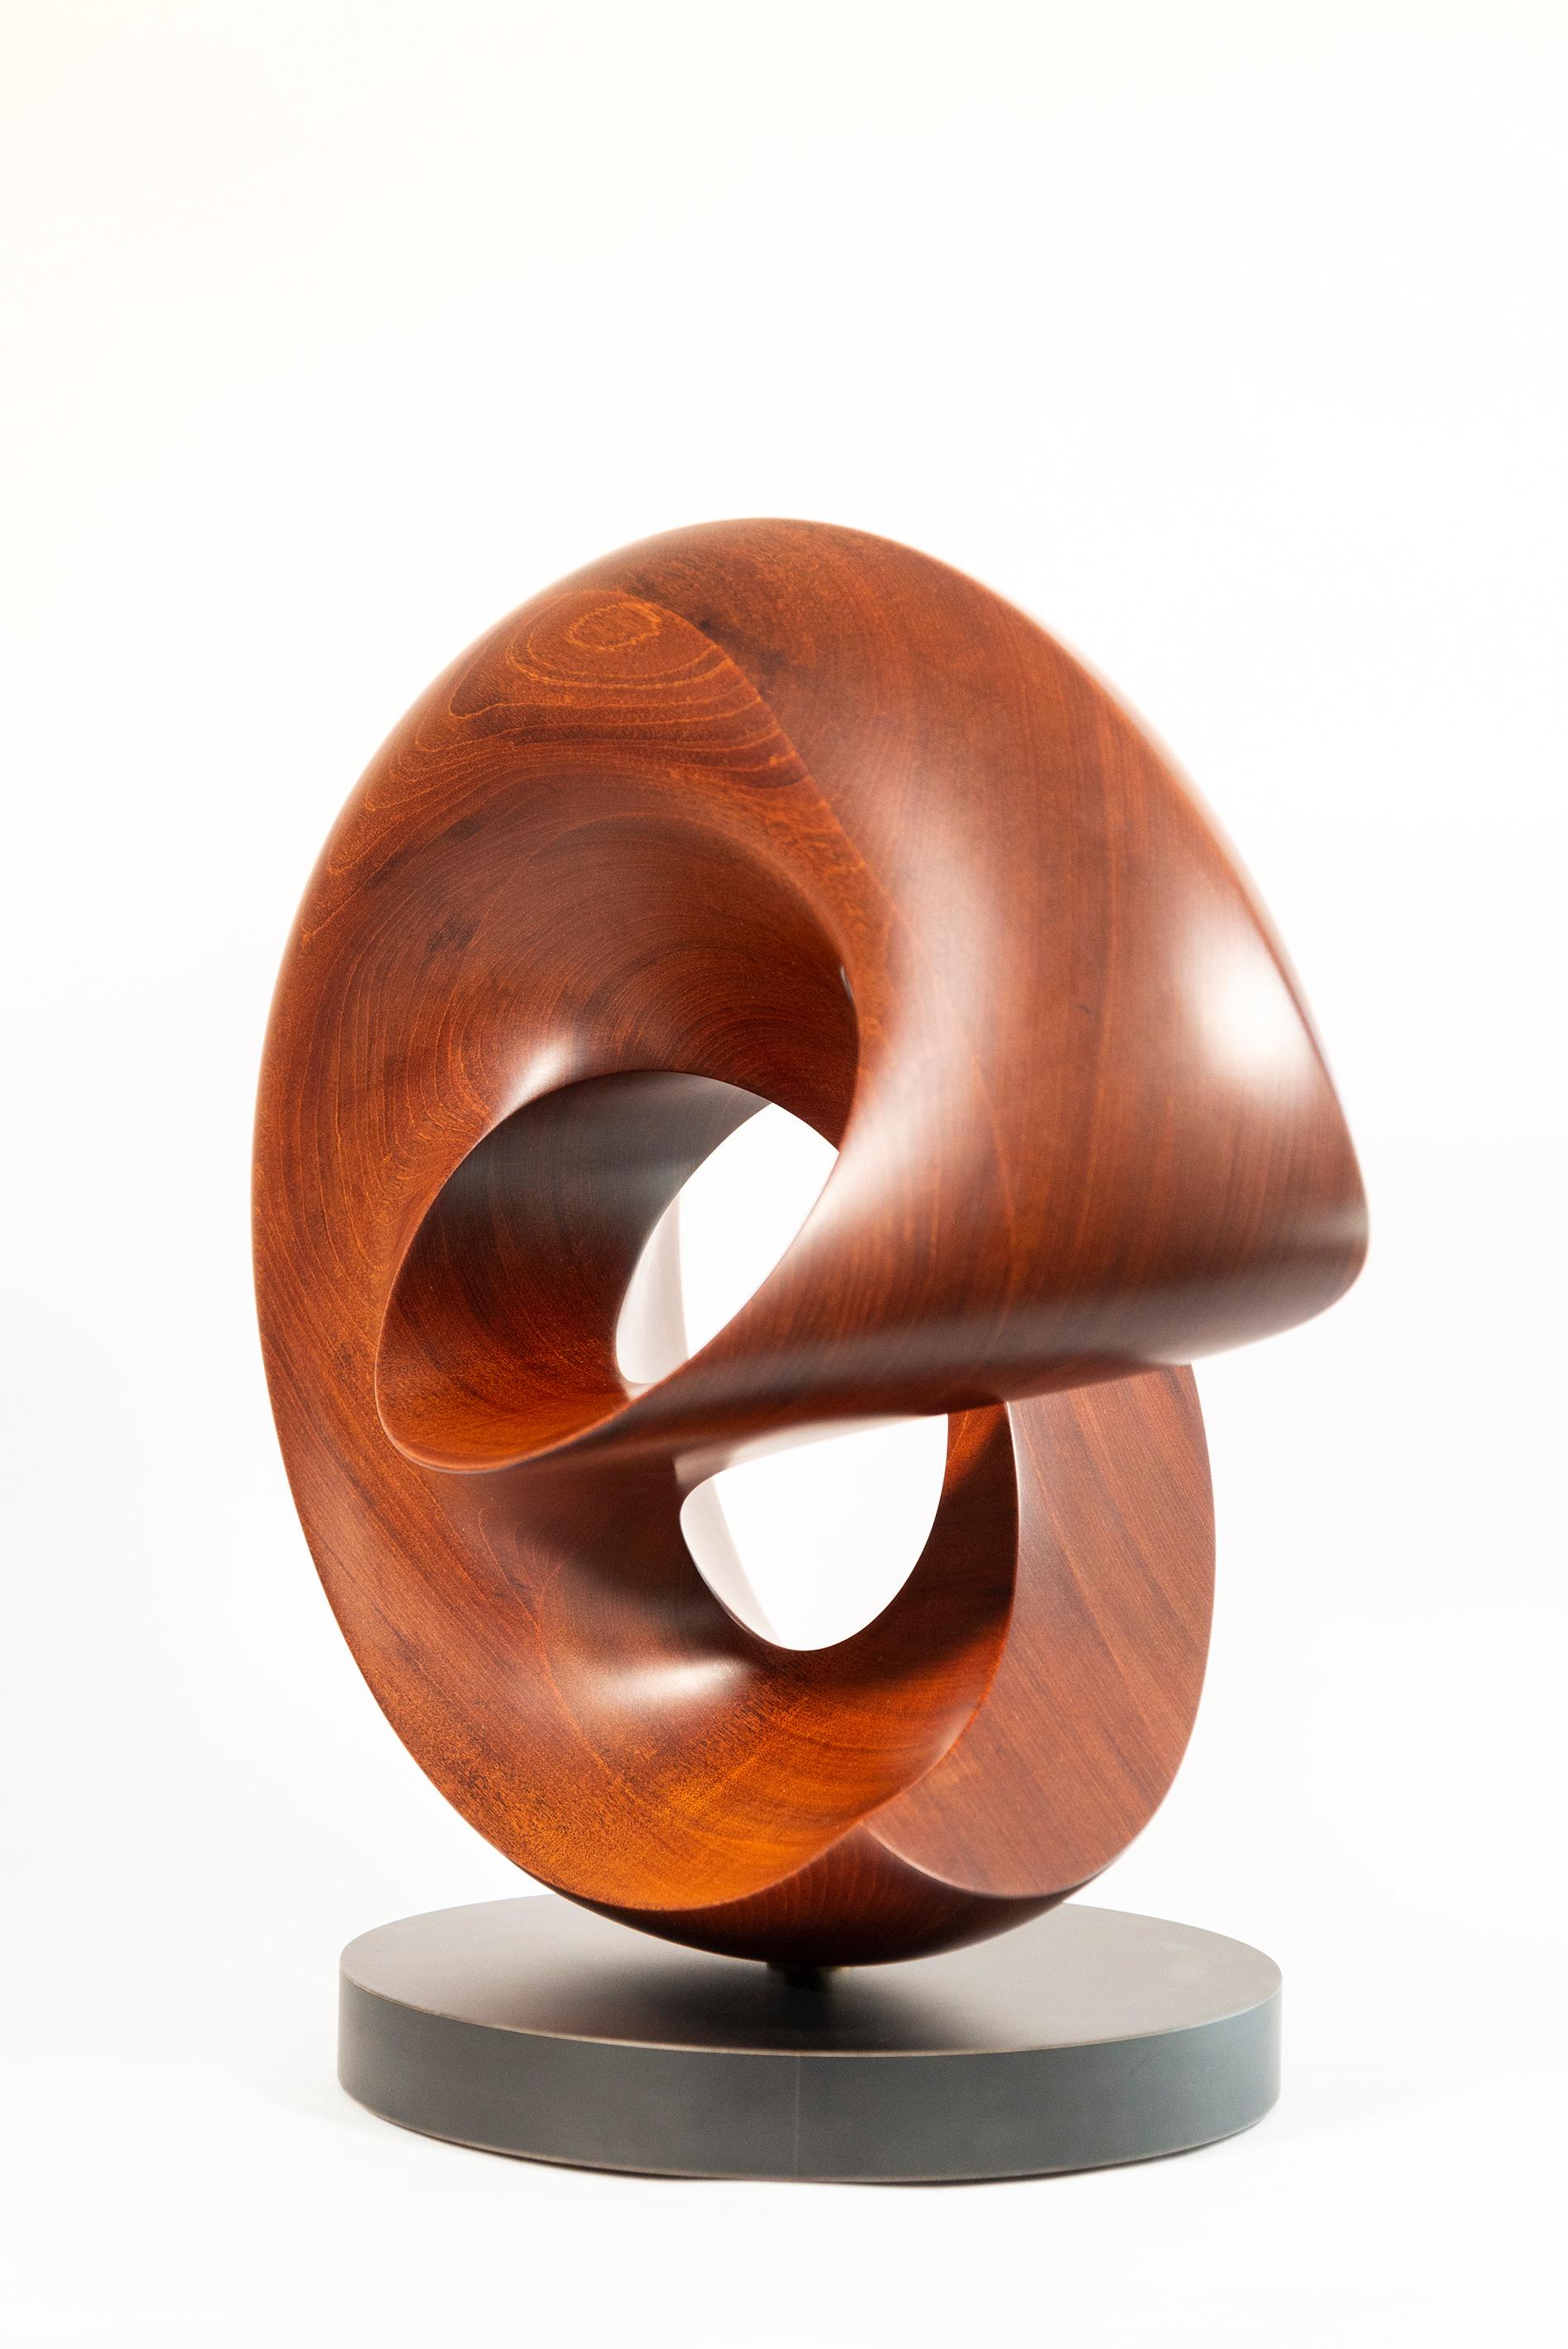 Fanfare - smooth, polished, abstract, contemporary, mahogany carved sculpture 4